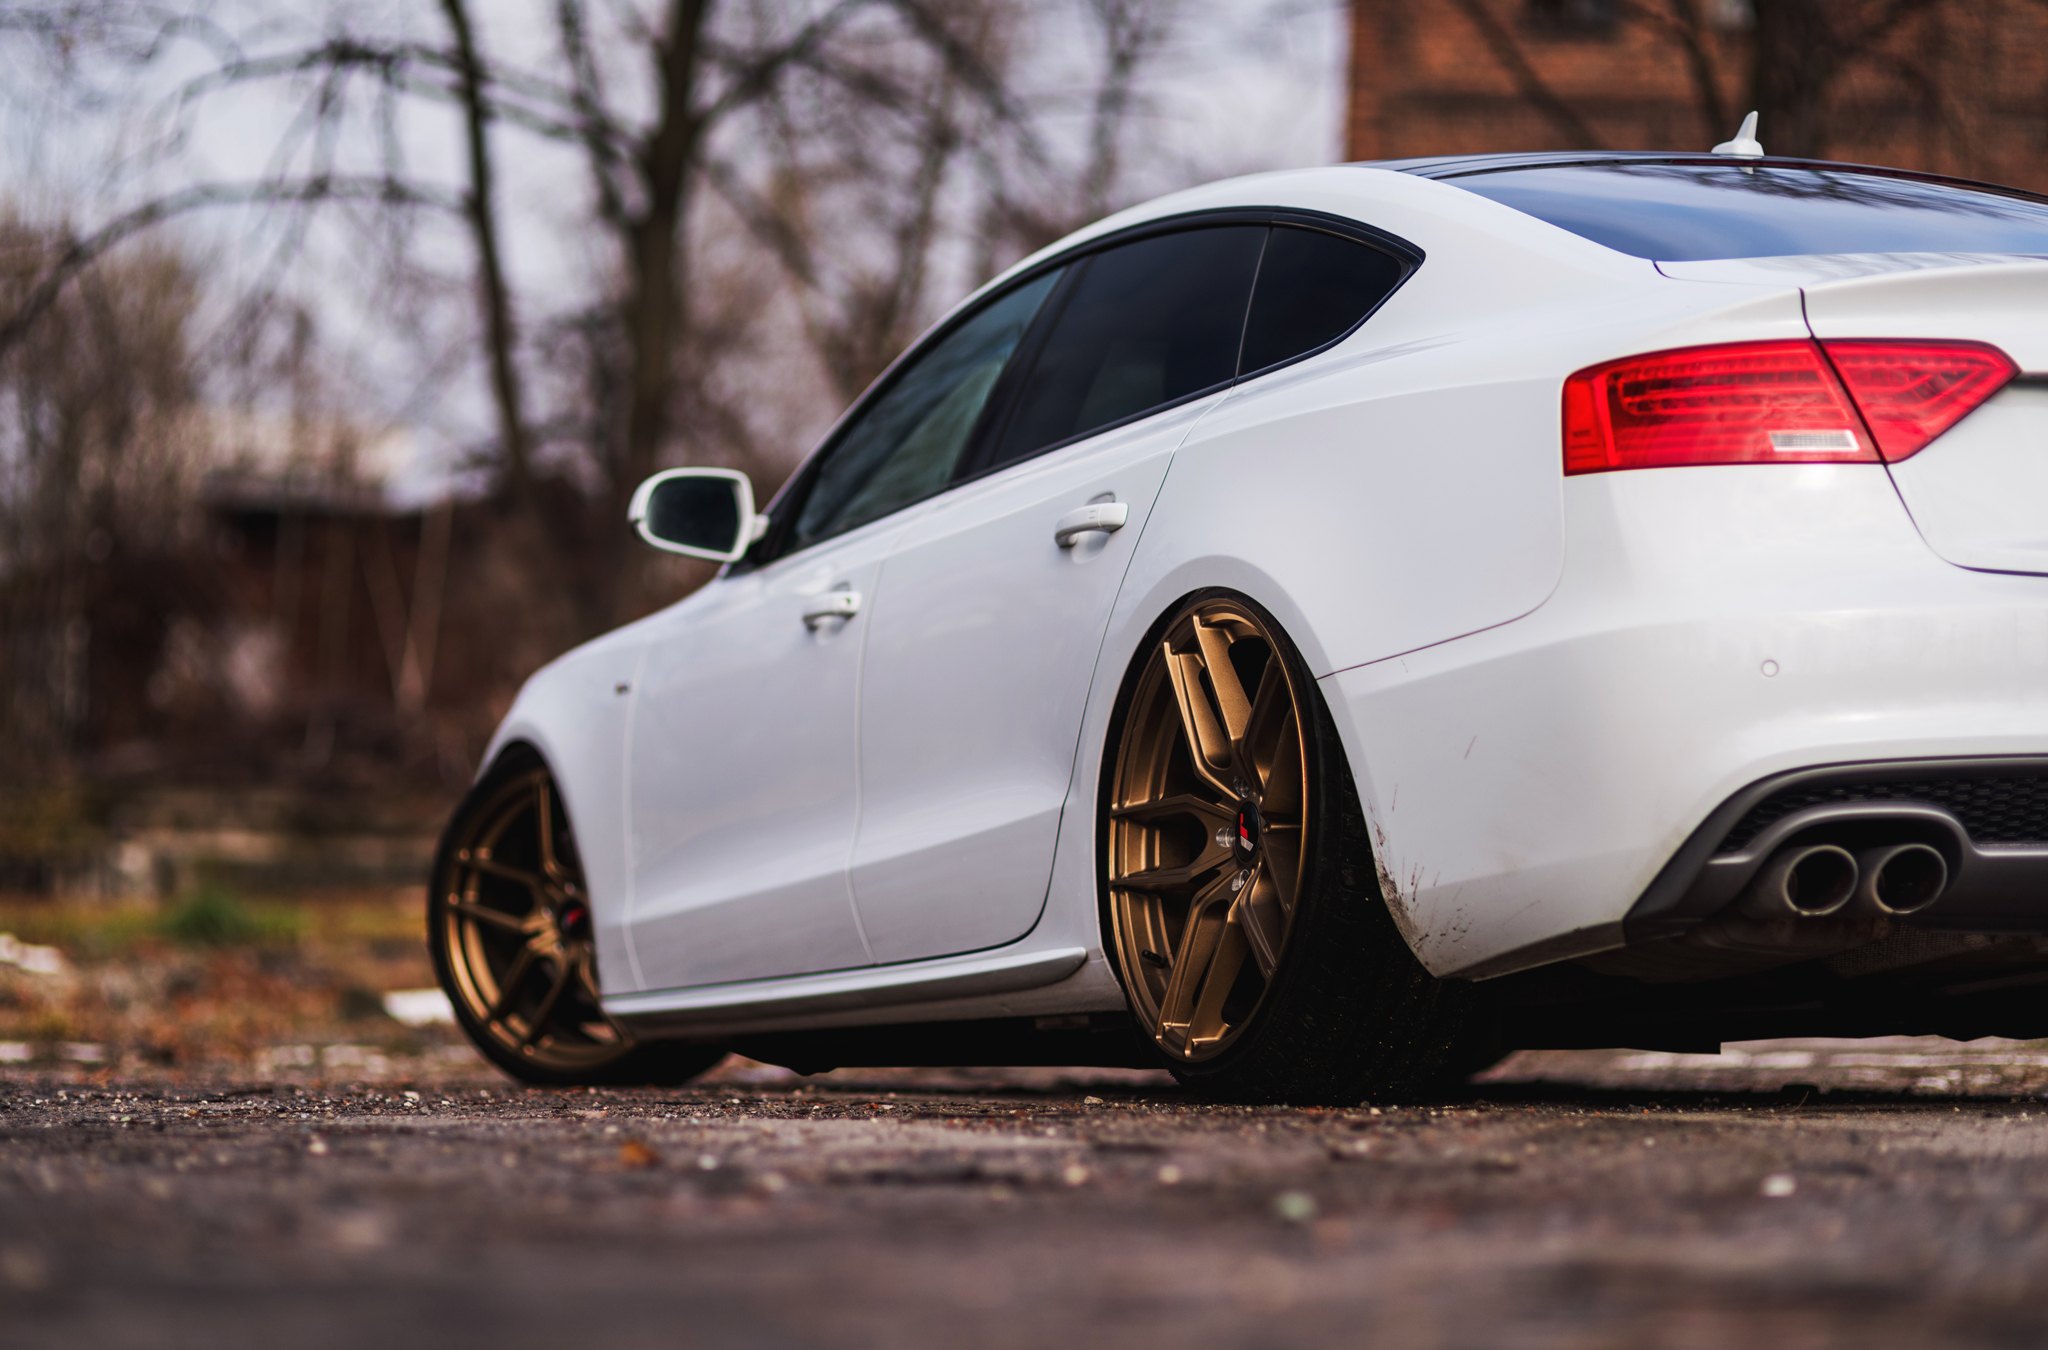 Aftermarket Rear Diffuser on White Audi A5 - Photo by JR Wheels